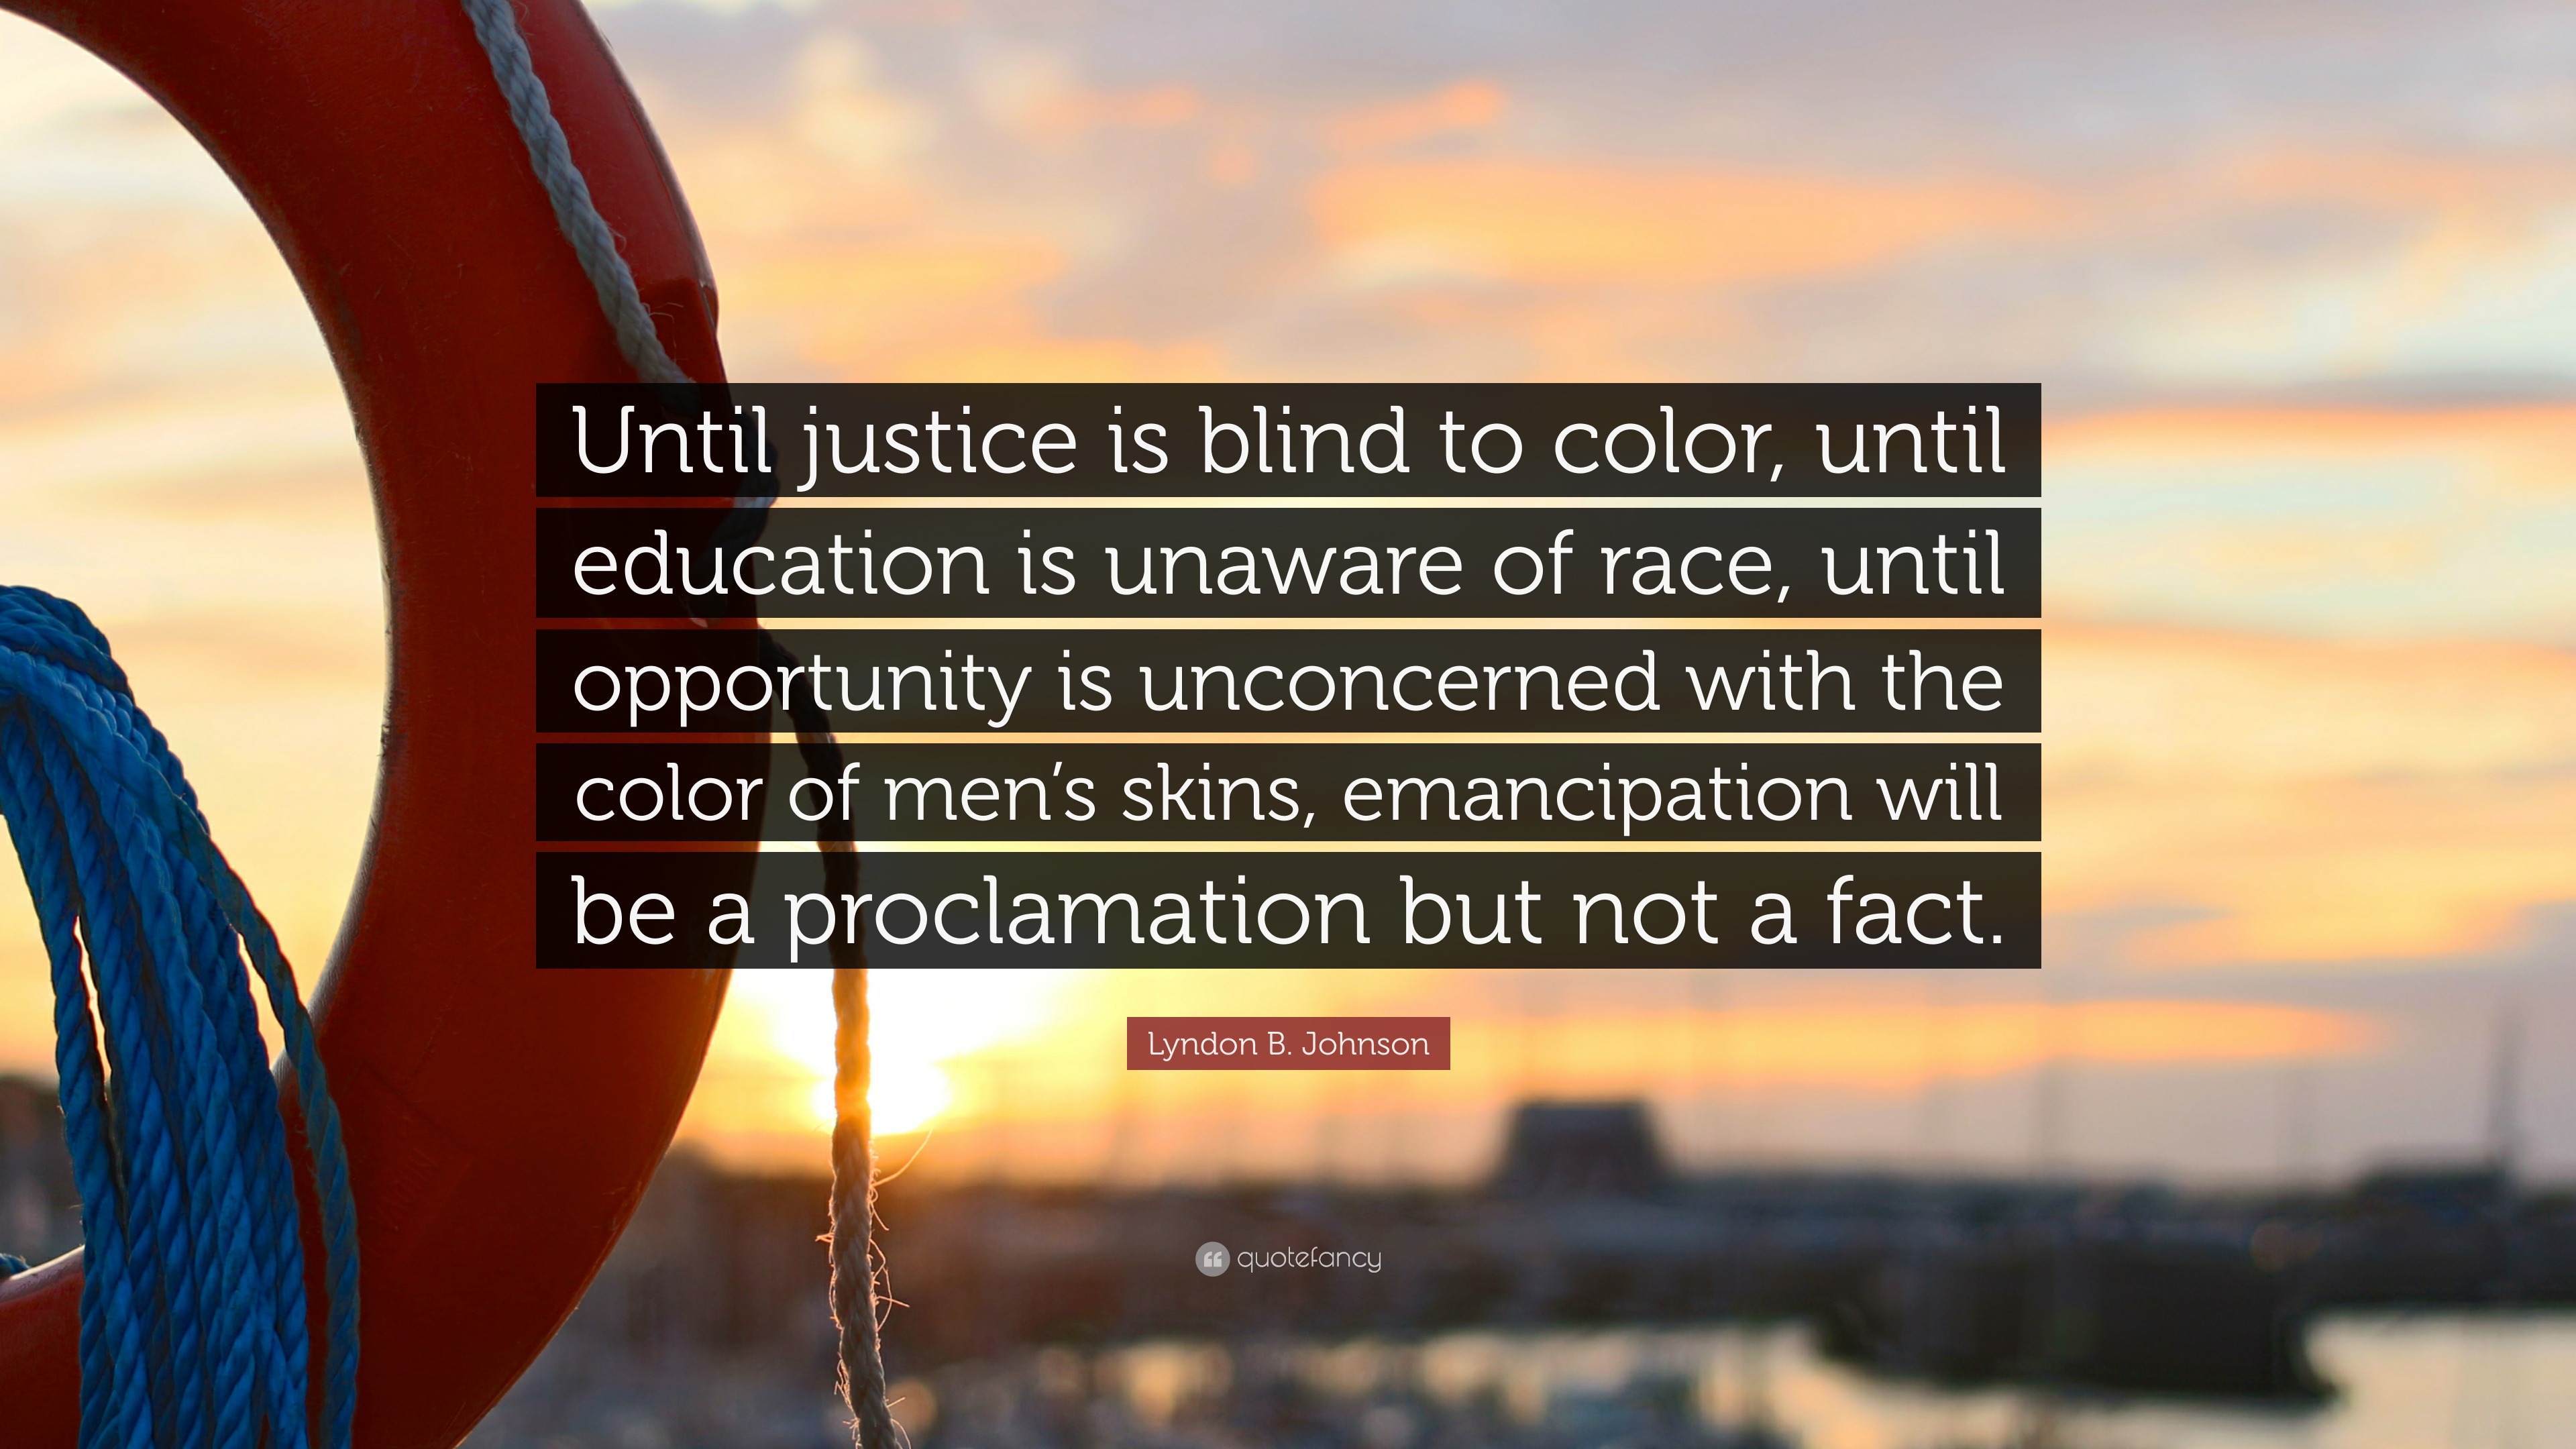 essay on justice is blind